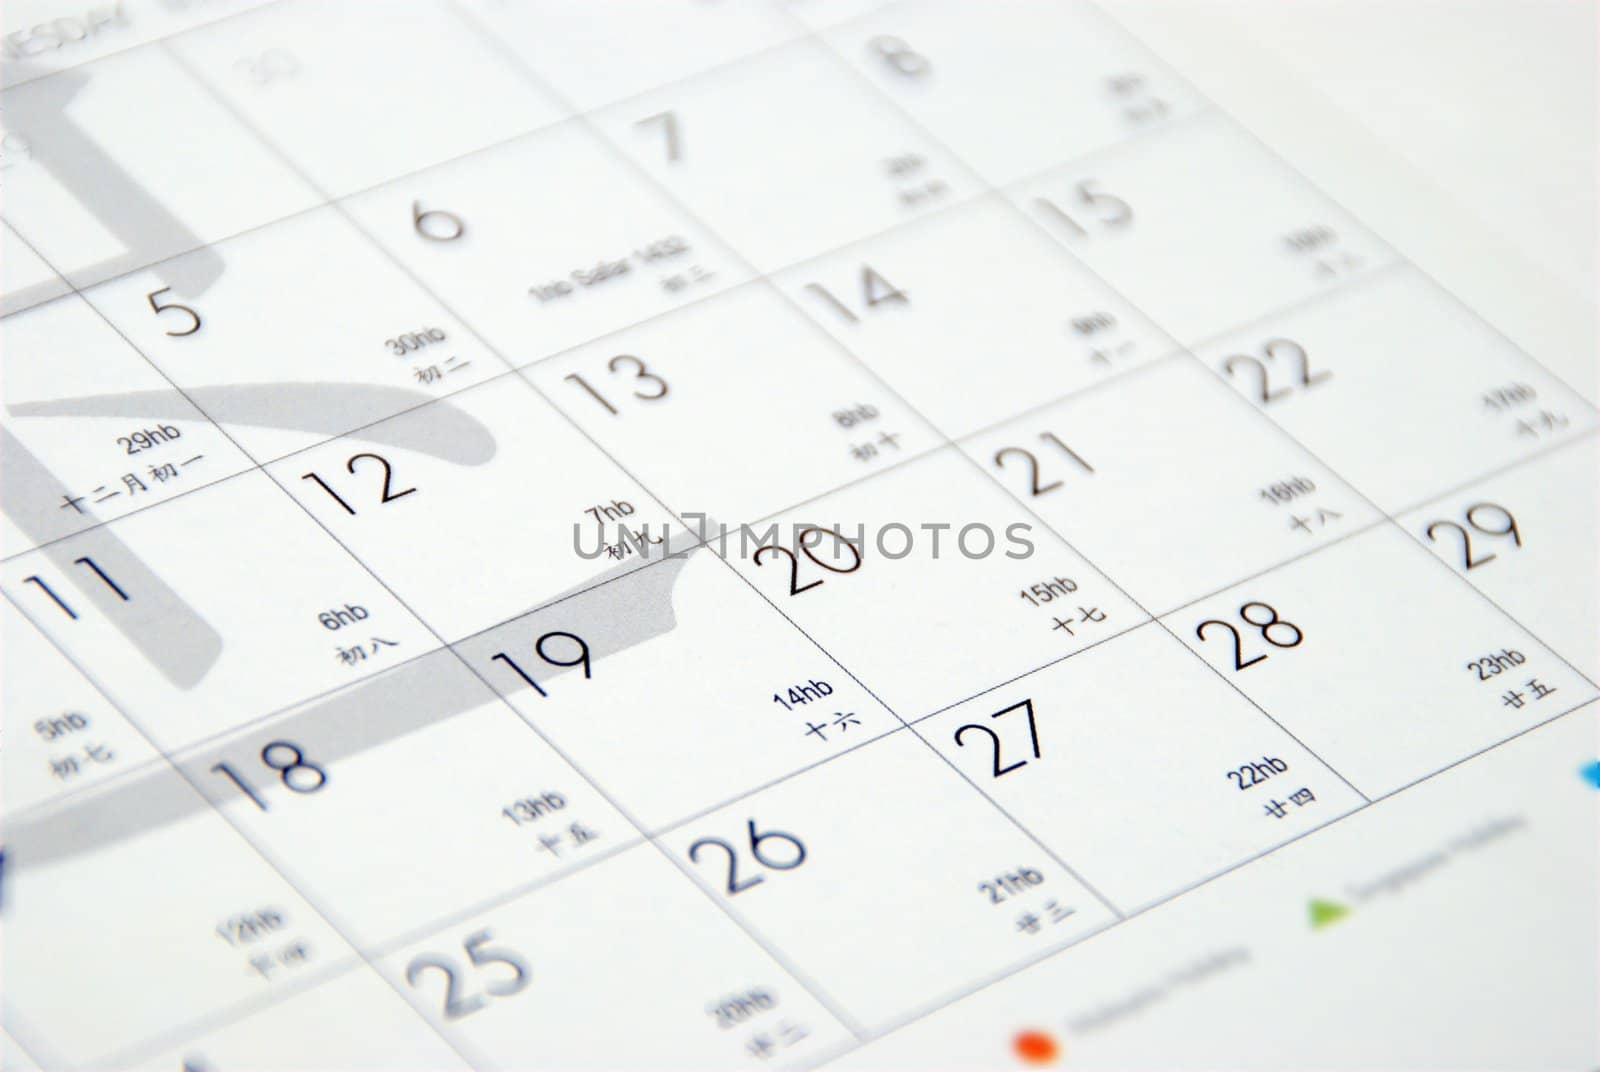 This is a image of table calendar.